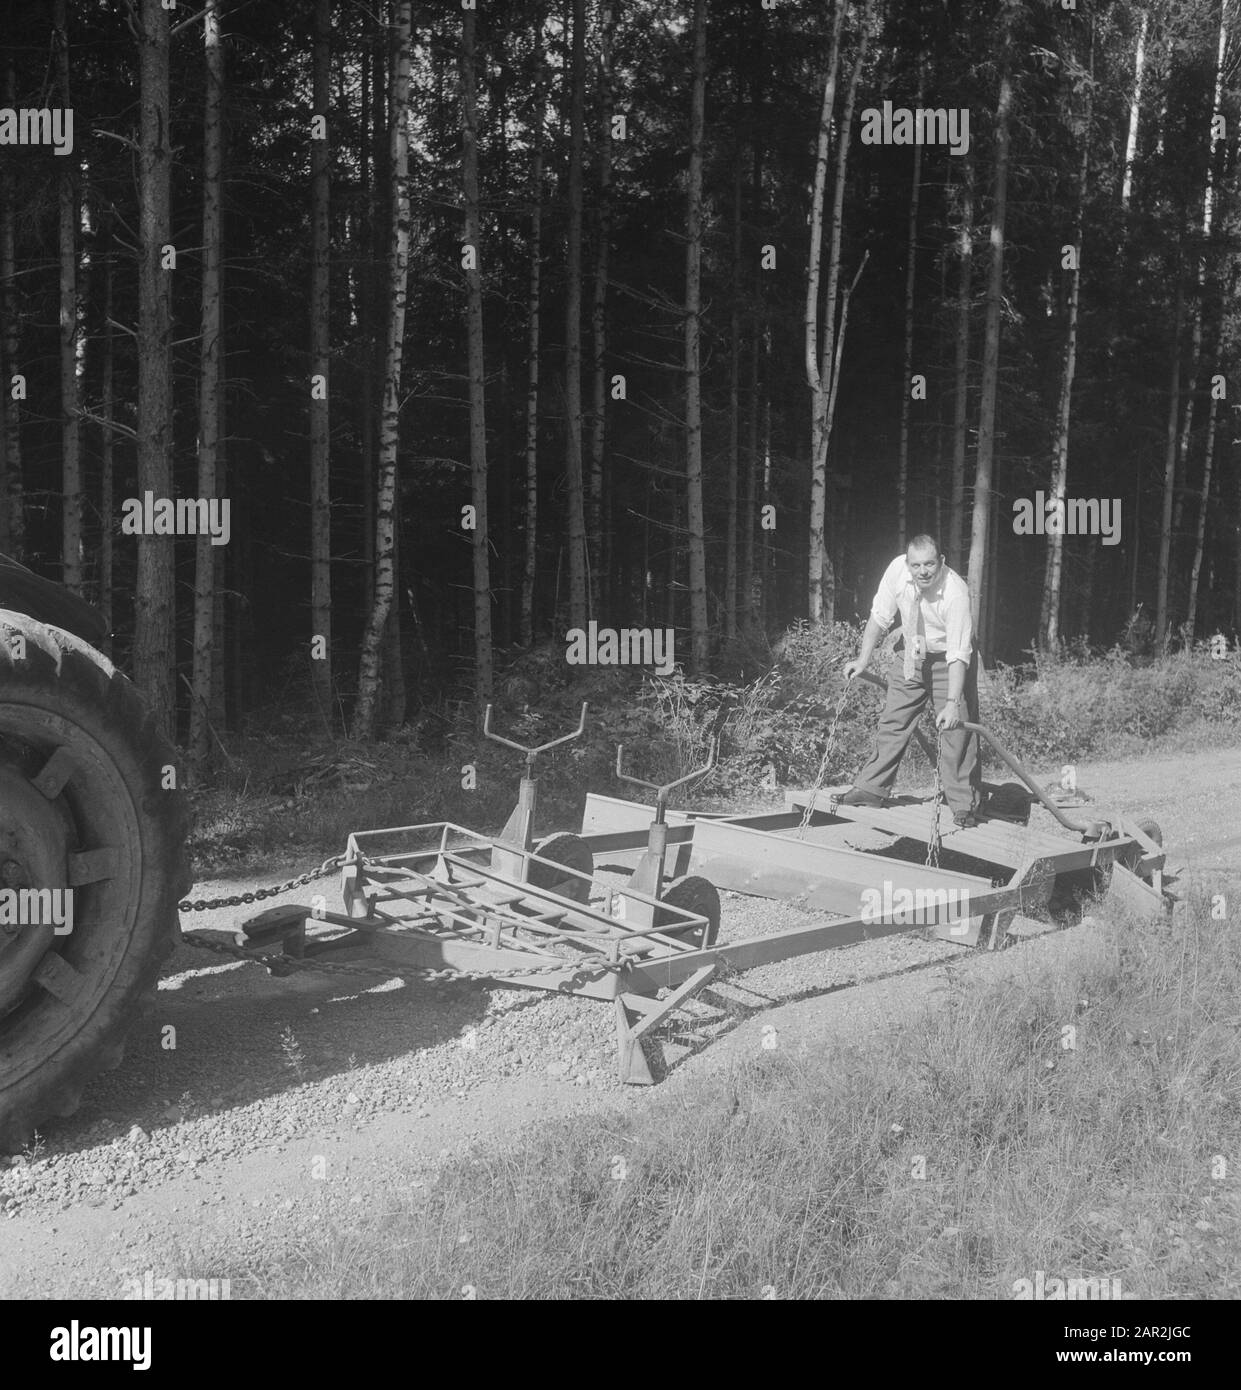 An agricultural tool as trailer of a tractor Date: undated Keywords: trailers, woodworking, machines, tools Stock Photo